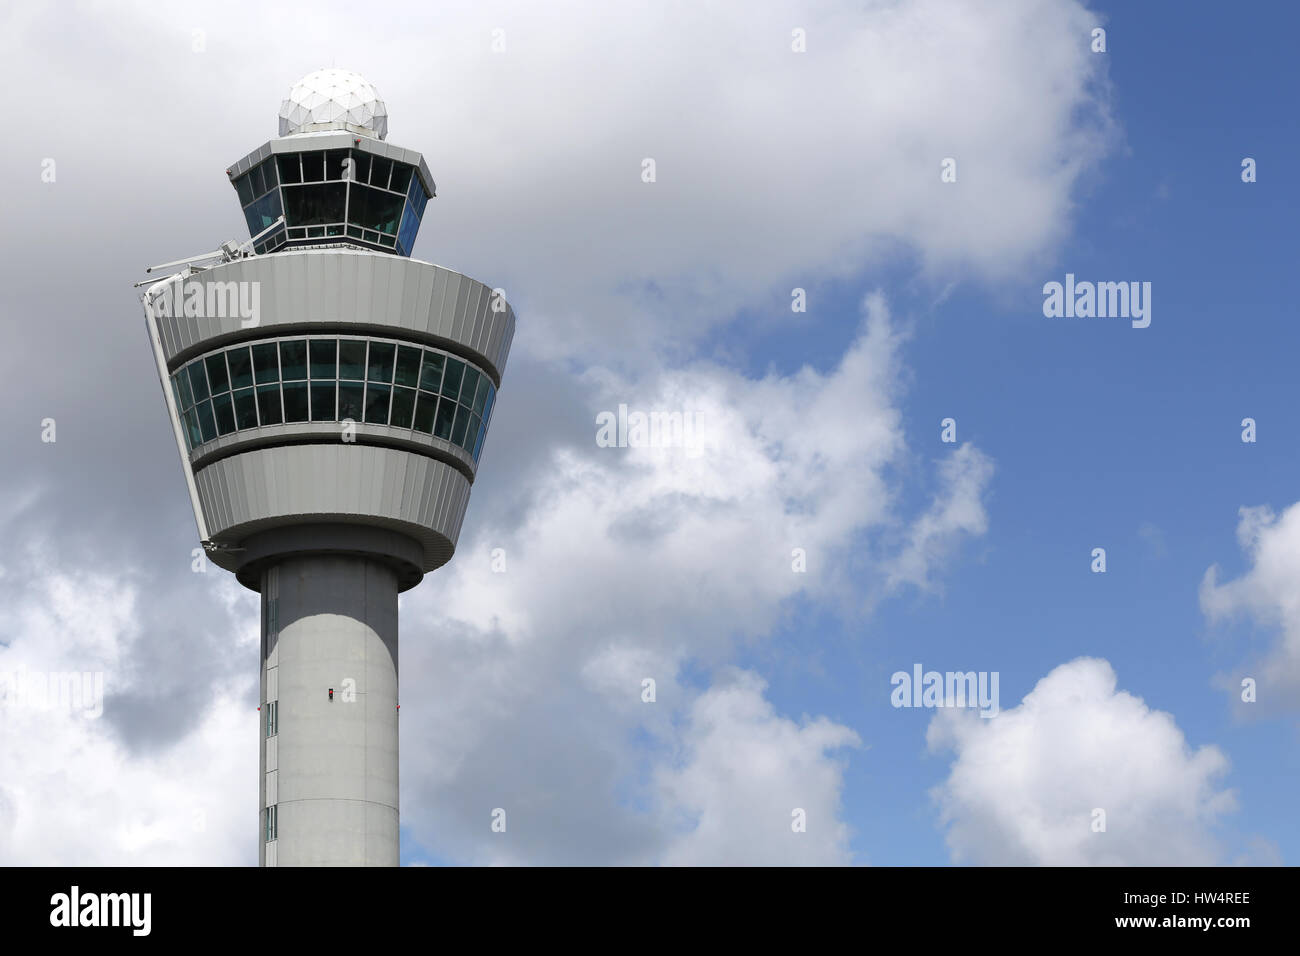 Air traffic control tower of Amsterdam Airport Schiphol. With a height of 101 m (331 ft), was the tallest in the world when constructed in 1991. Stock Photo